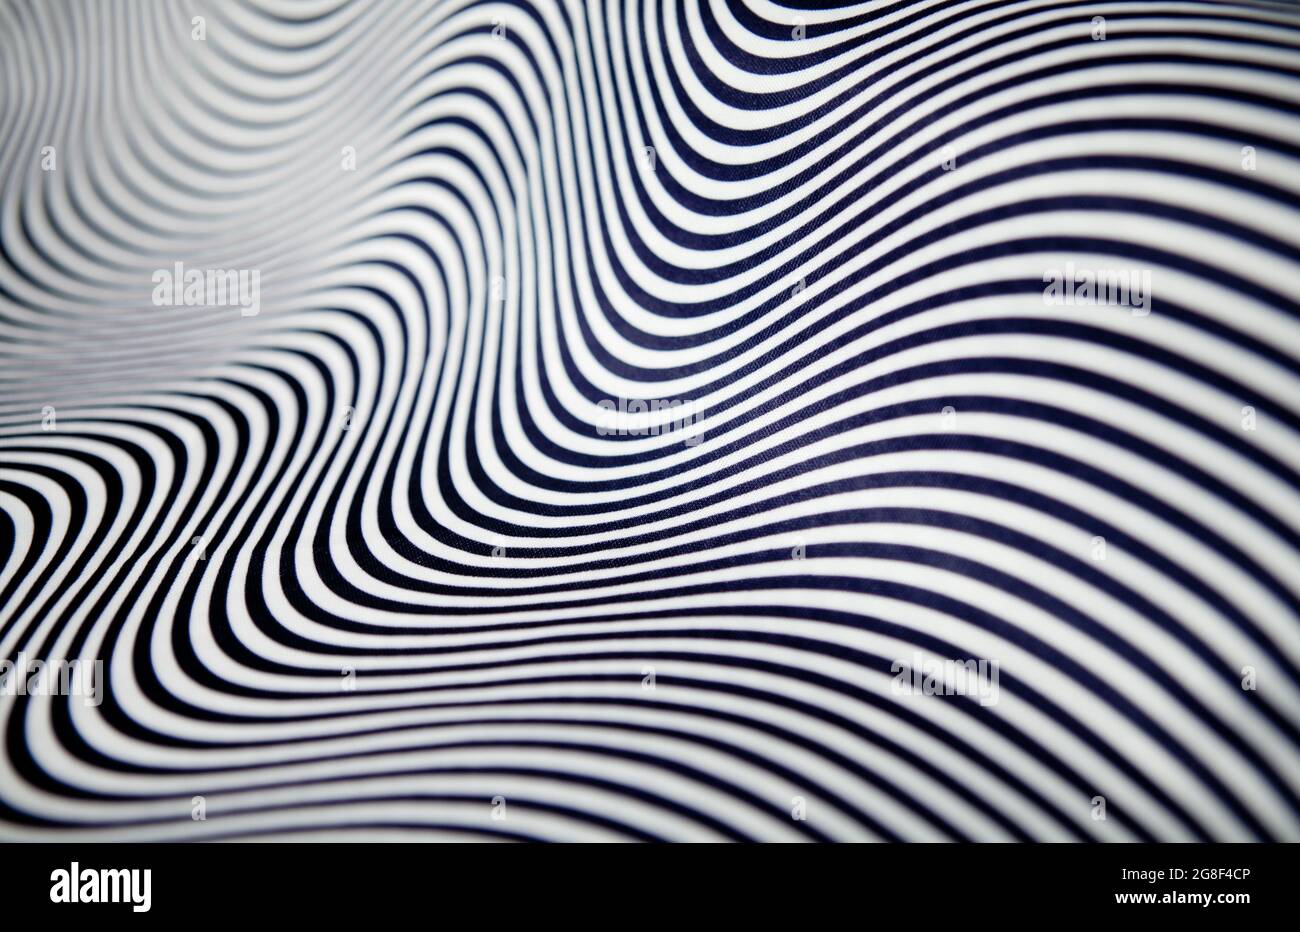 Geometric striped abstract optical illusion, pattern. Black and white vibrant parallel curves, web background. Multi exposure. Stock Photo